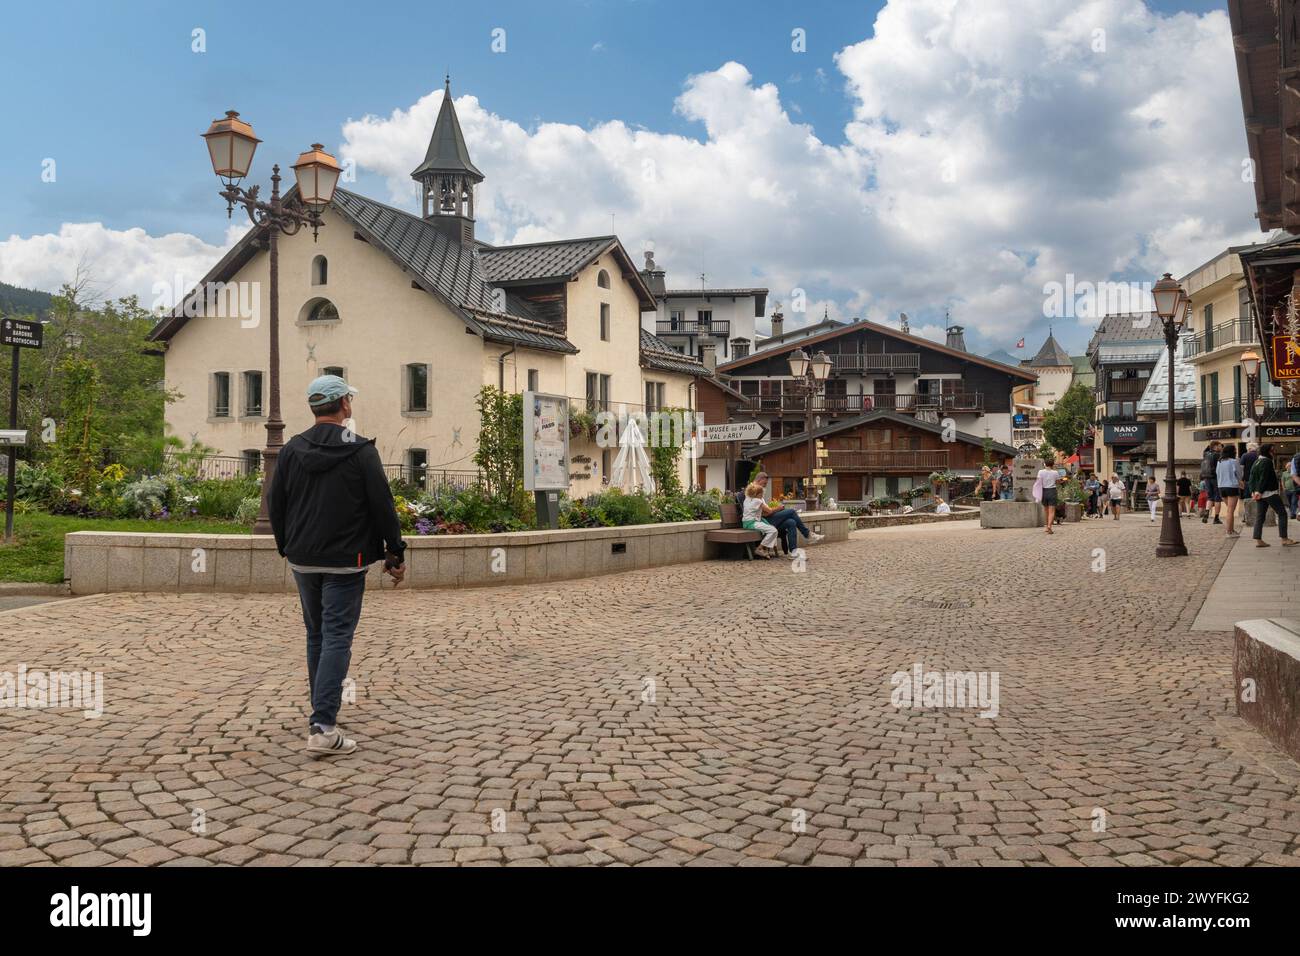 Centre of the alpine town, one of the most famous ski resorts in the world, conceived in the 1920s by the Rothschild family, Megeve, France Stock Photo